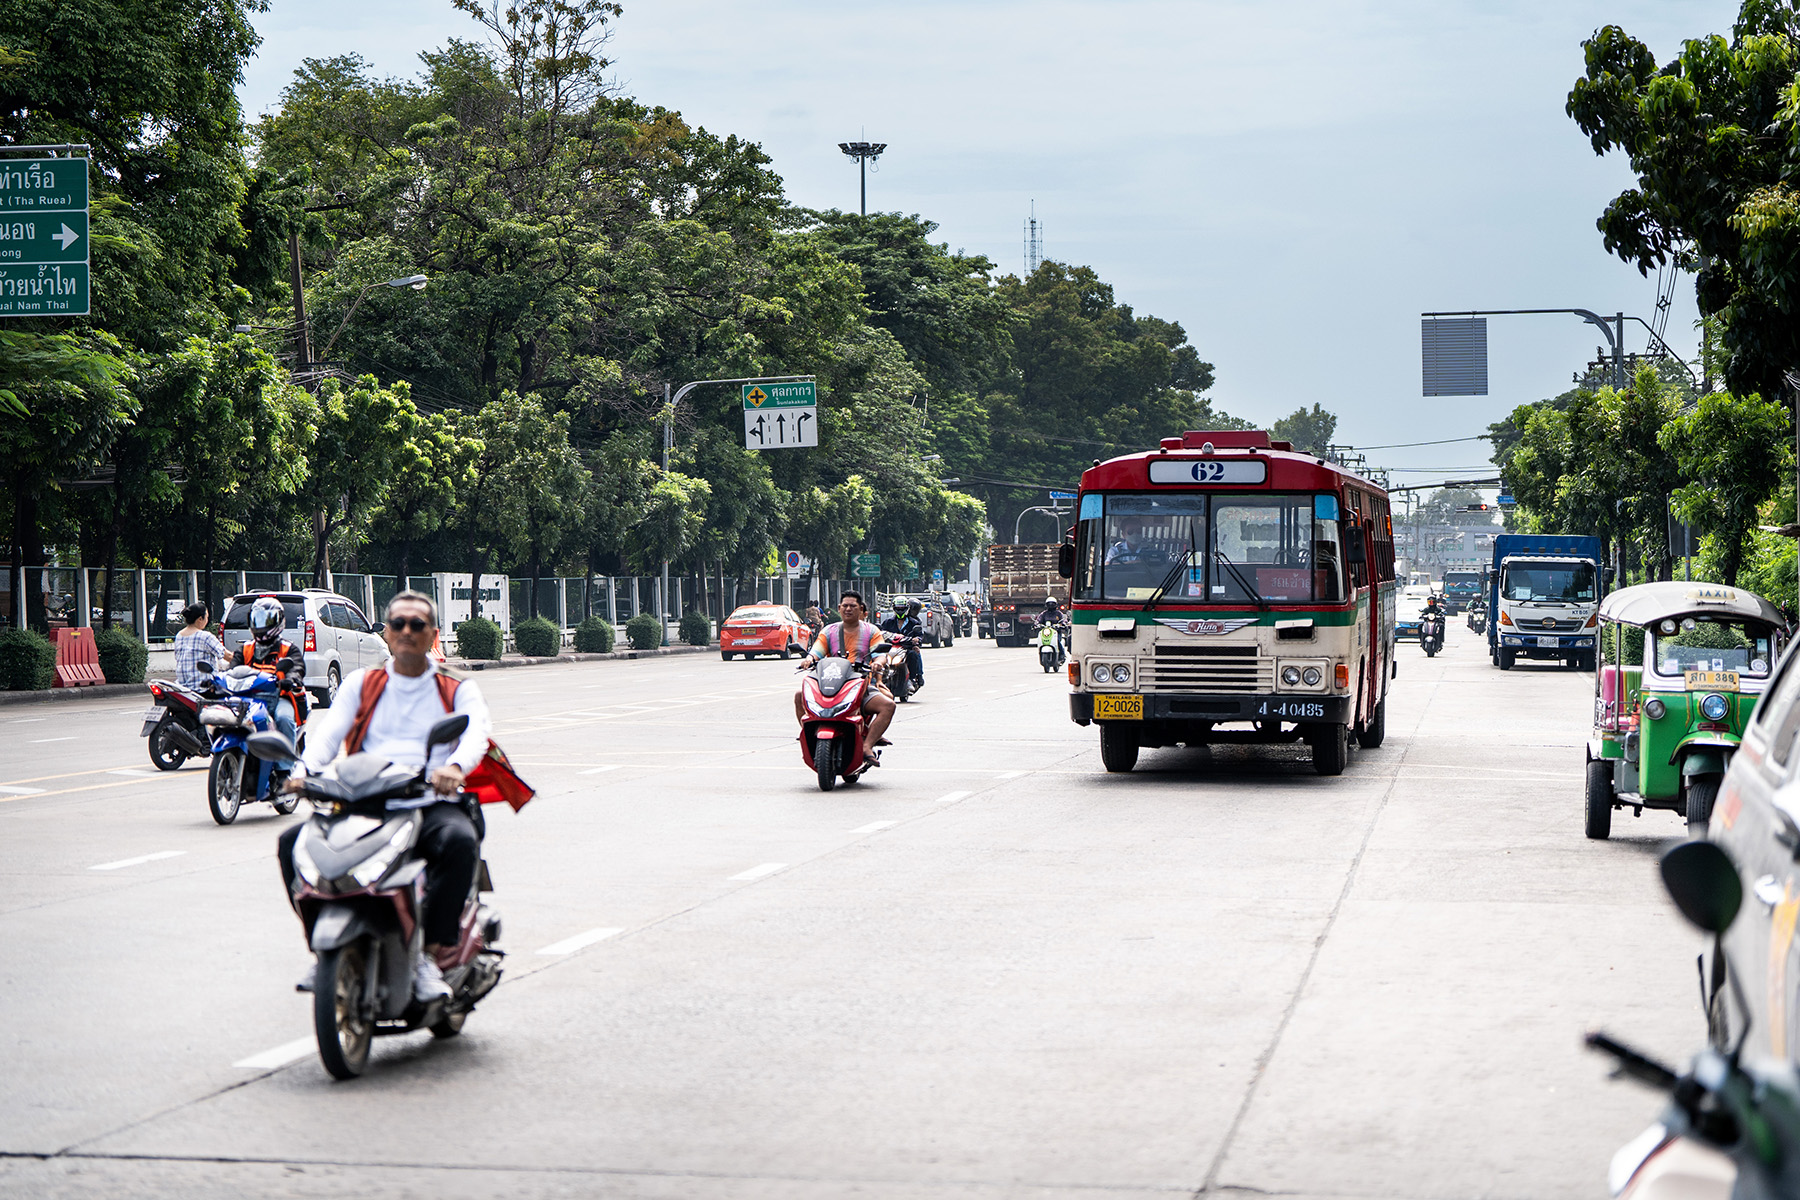 Buses, taxis, mopeds, and tuk-tuks on the street